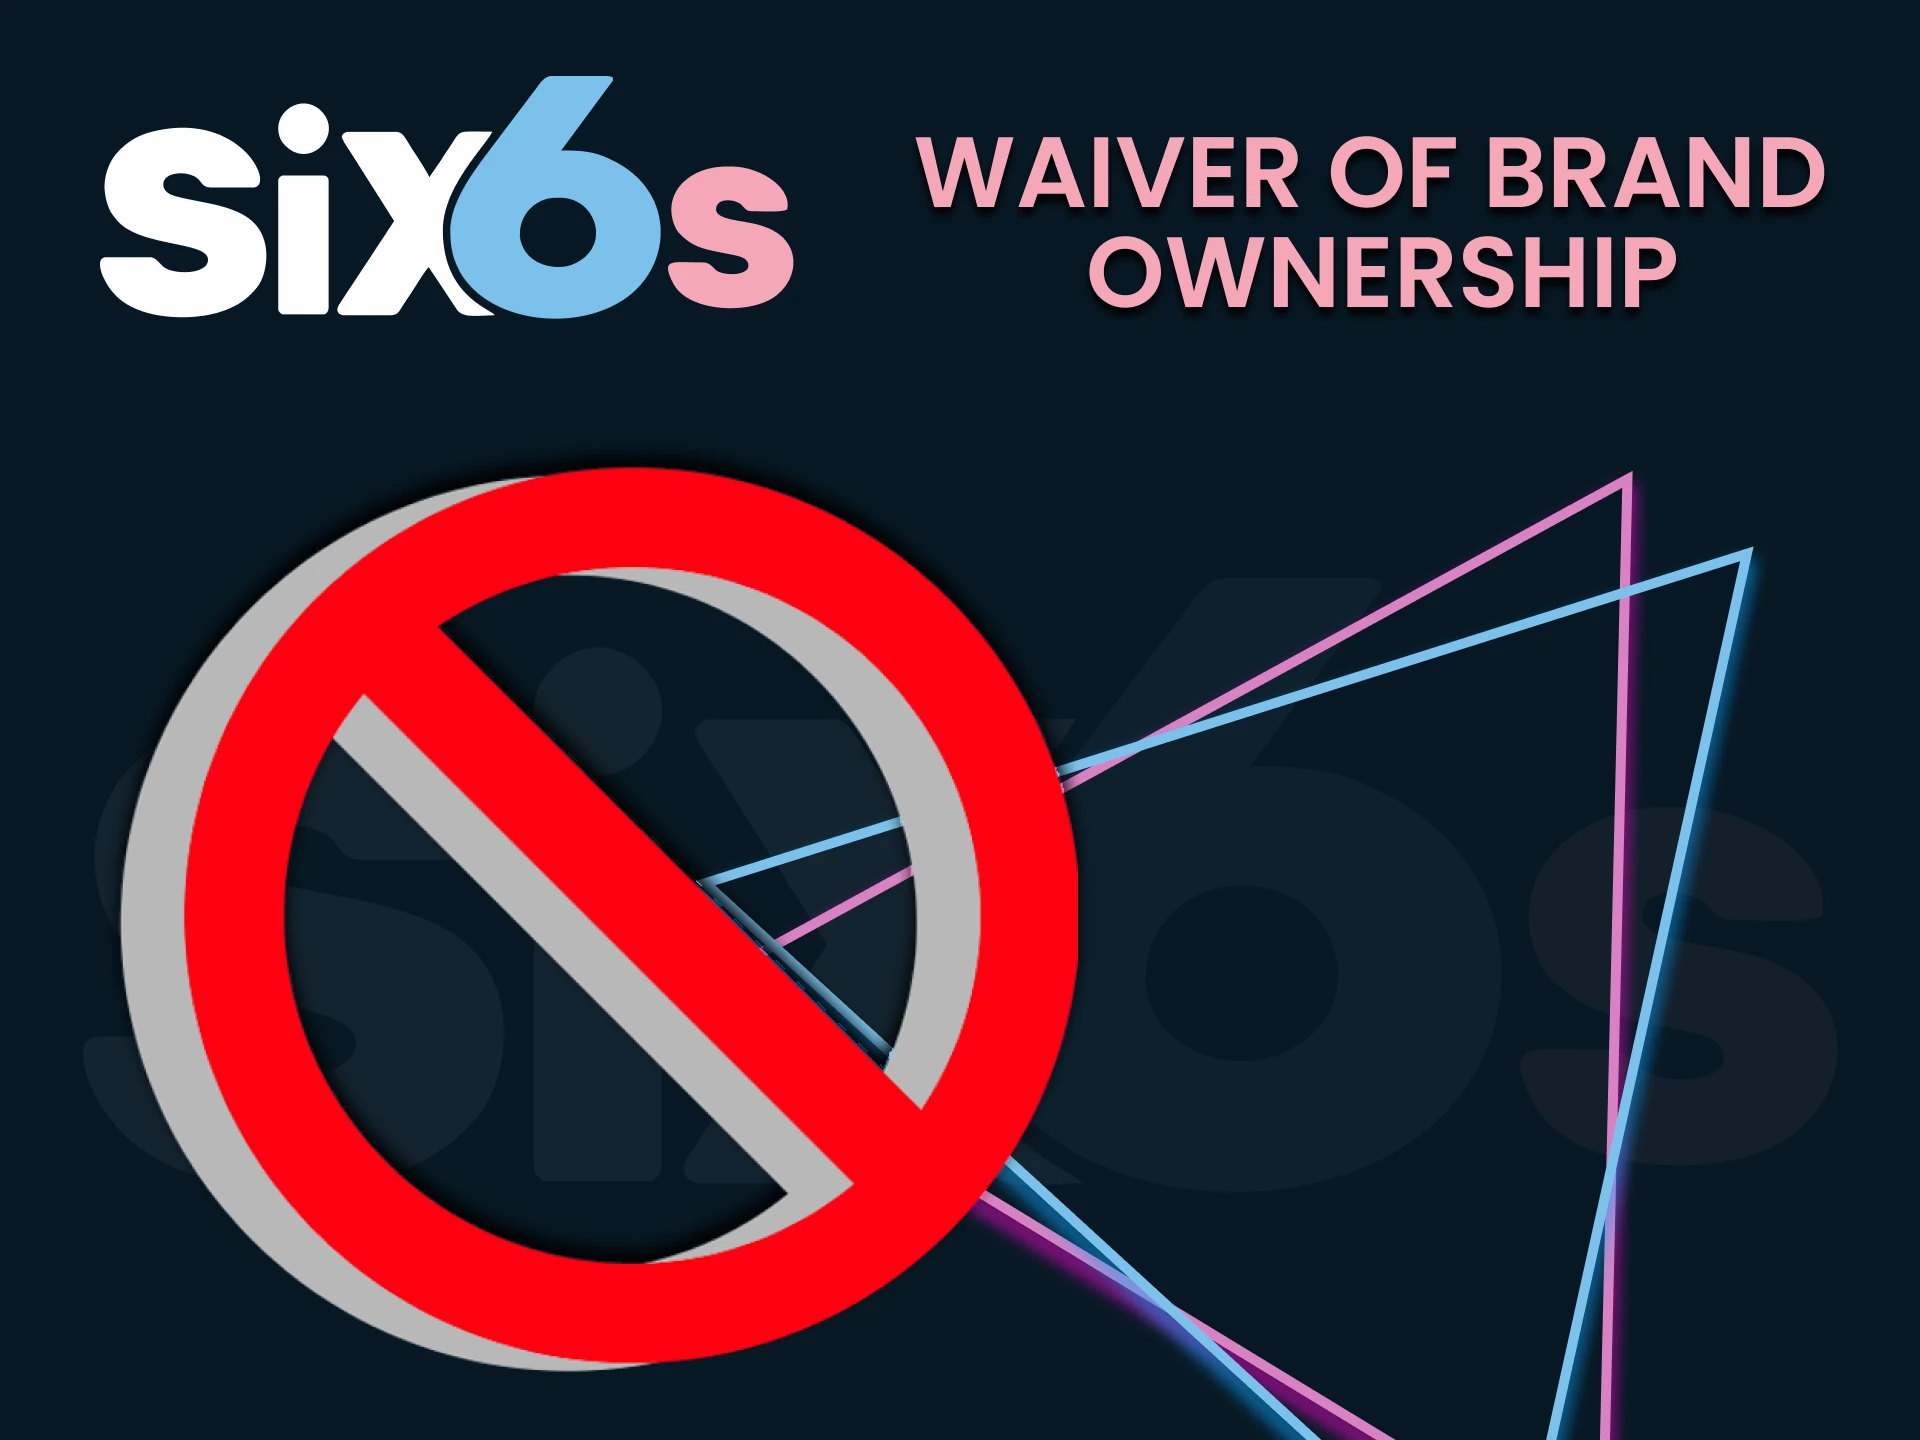 Find out who owns the Six6s brand.